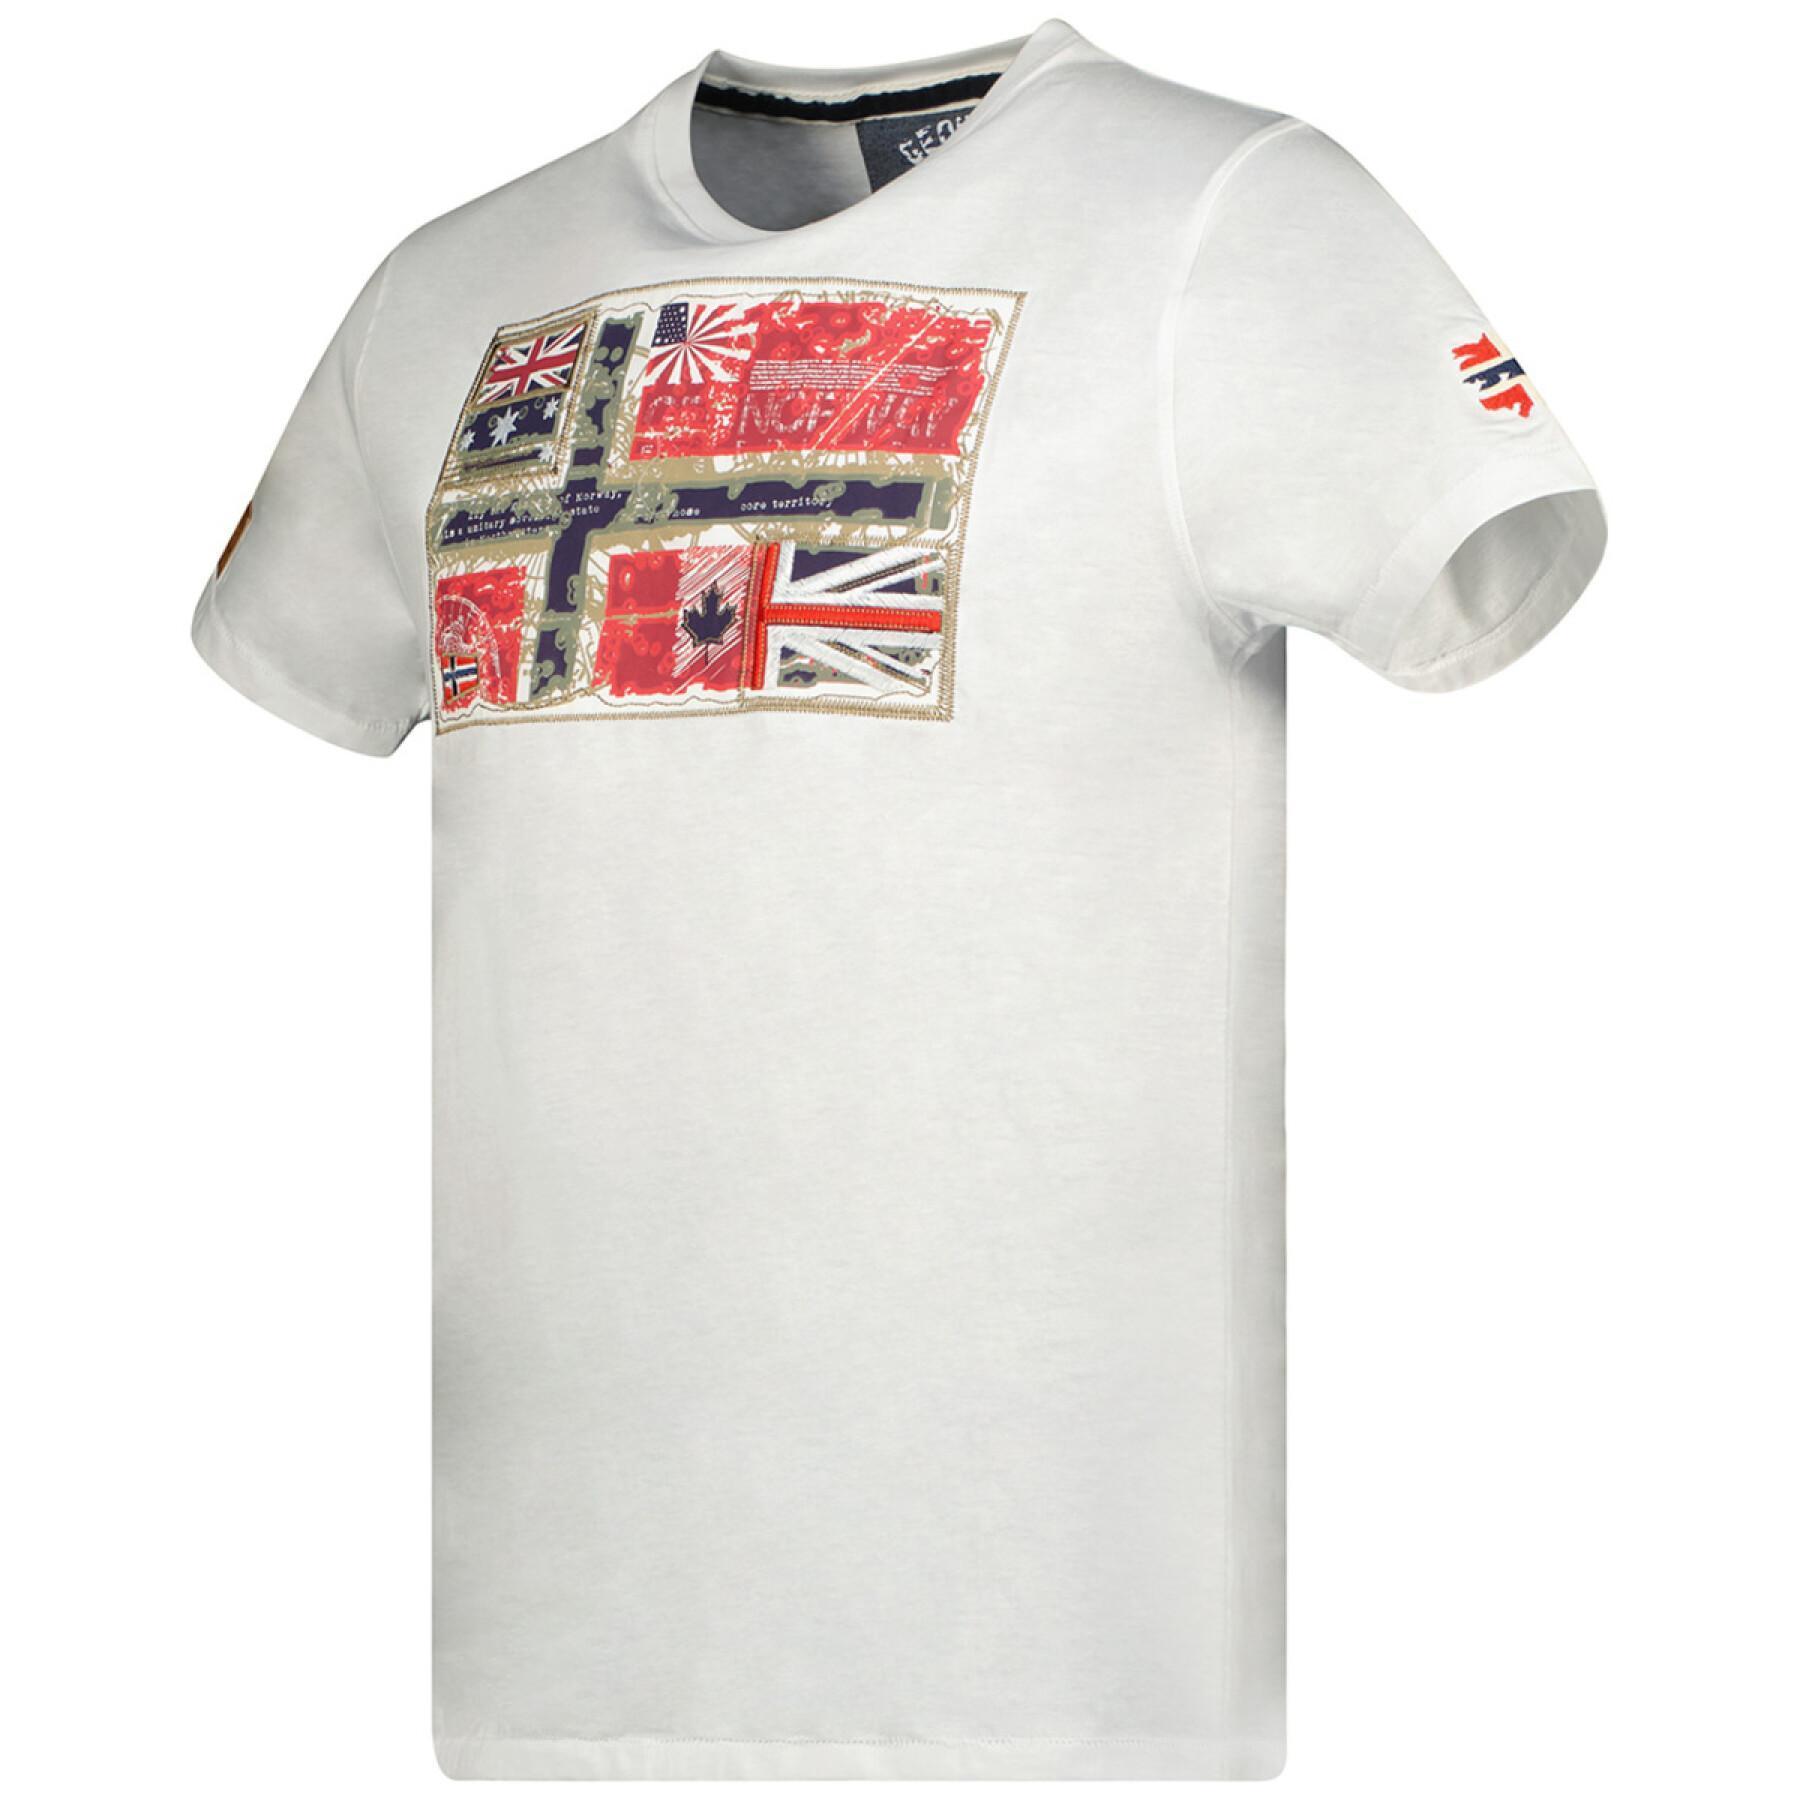 T-shirt Geographical Norway Jpepe 2 Db